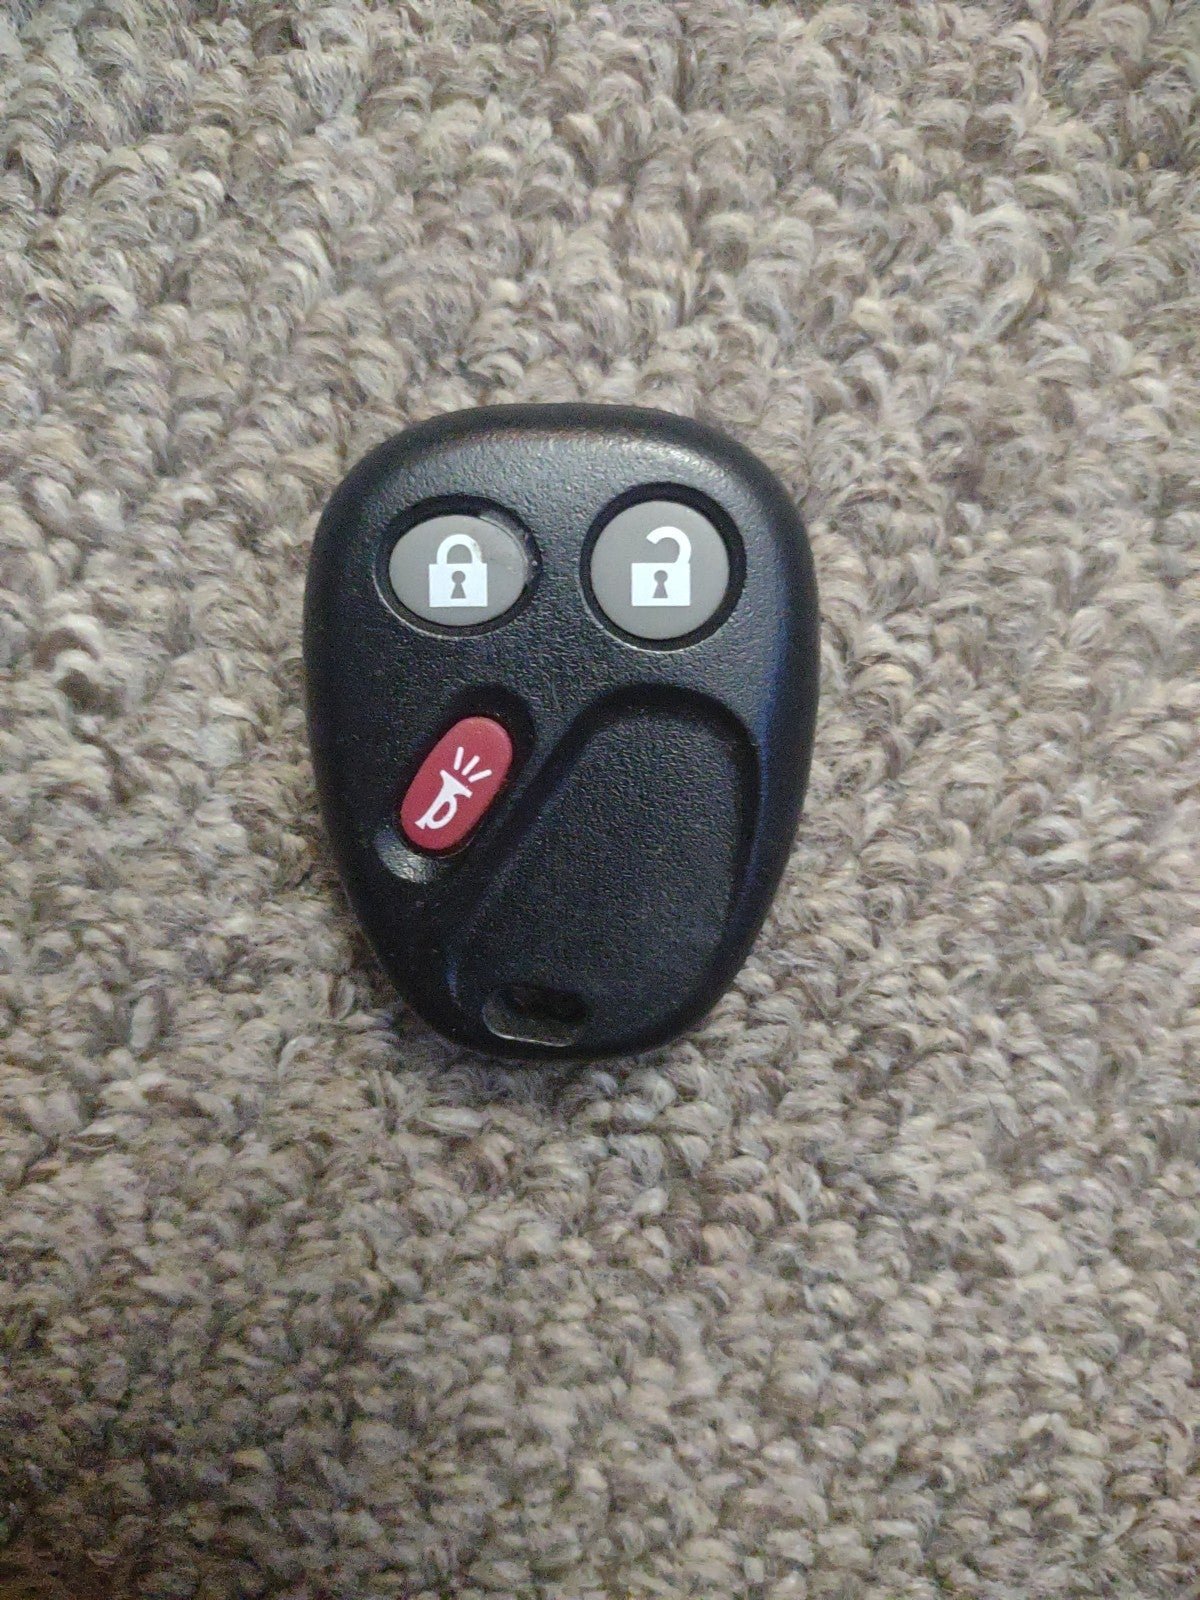 Key Fob For Most Older Model Chevrolets/GMC/Buick (2003-2009) Models Listed Pics 6kbng1lqg